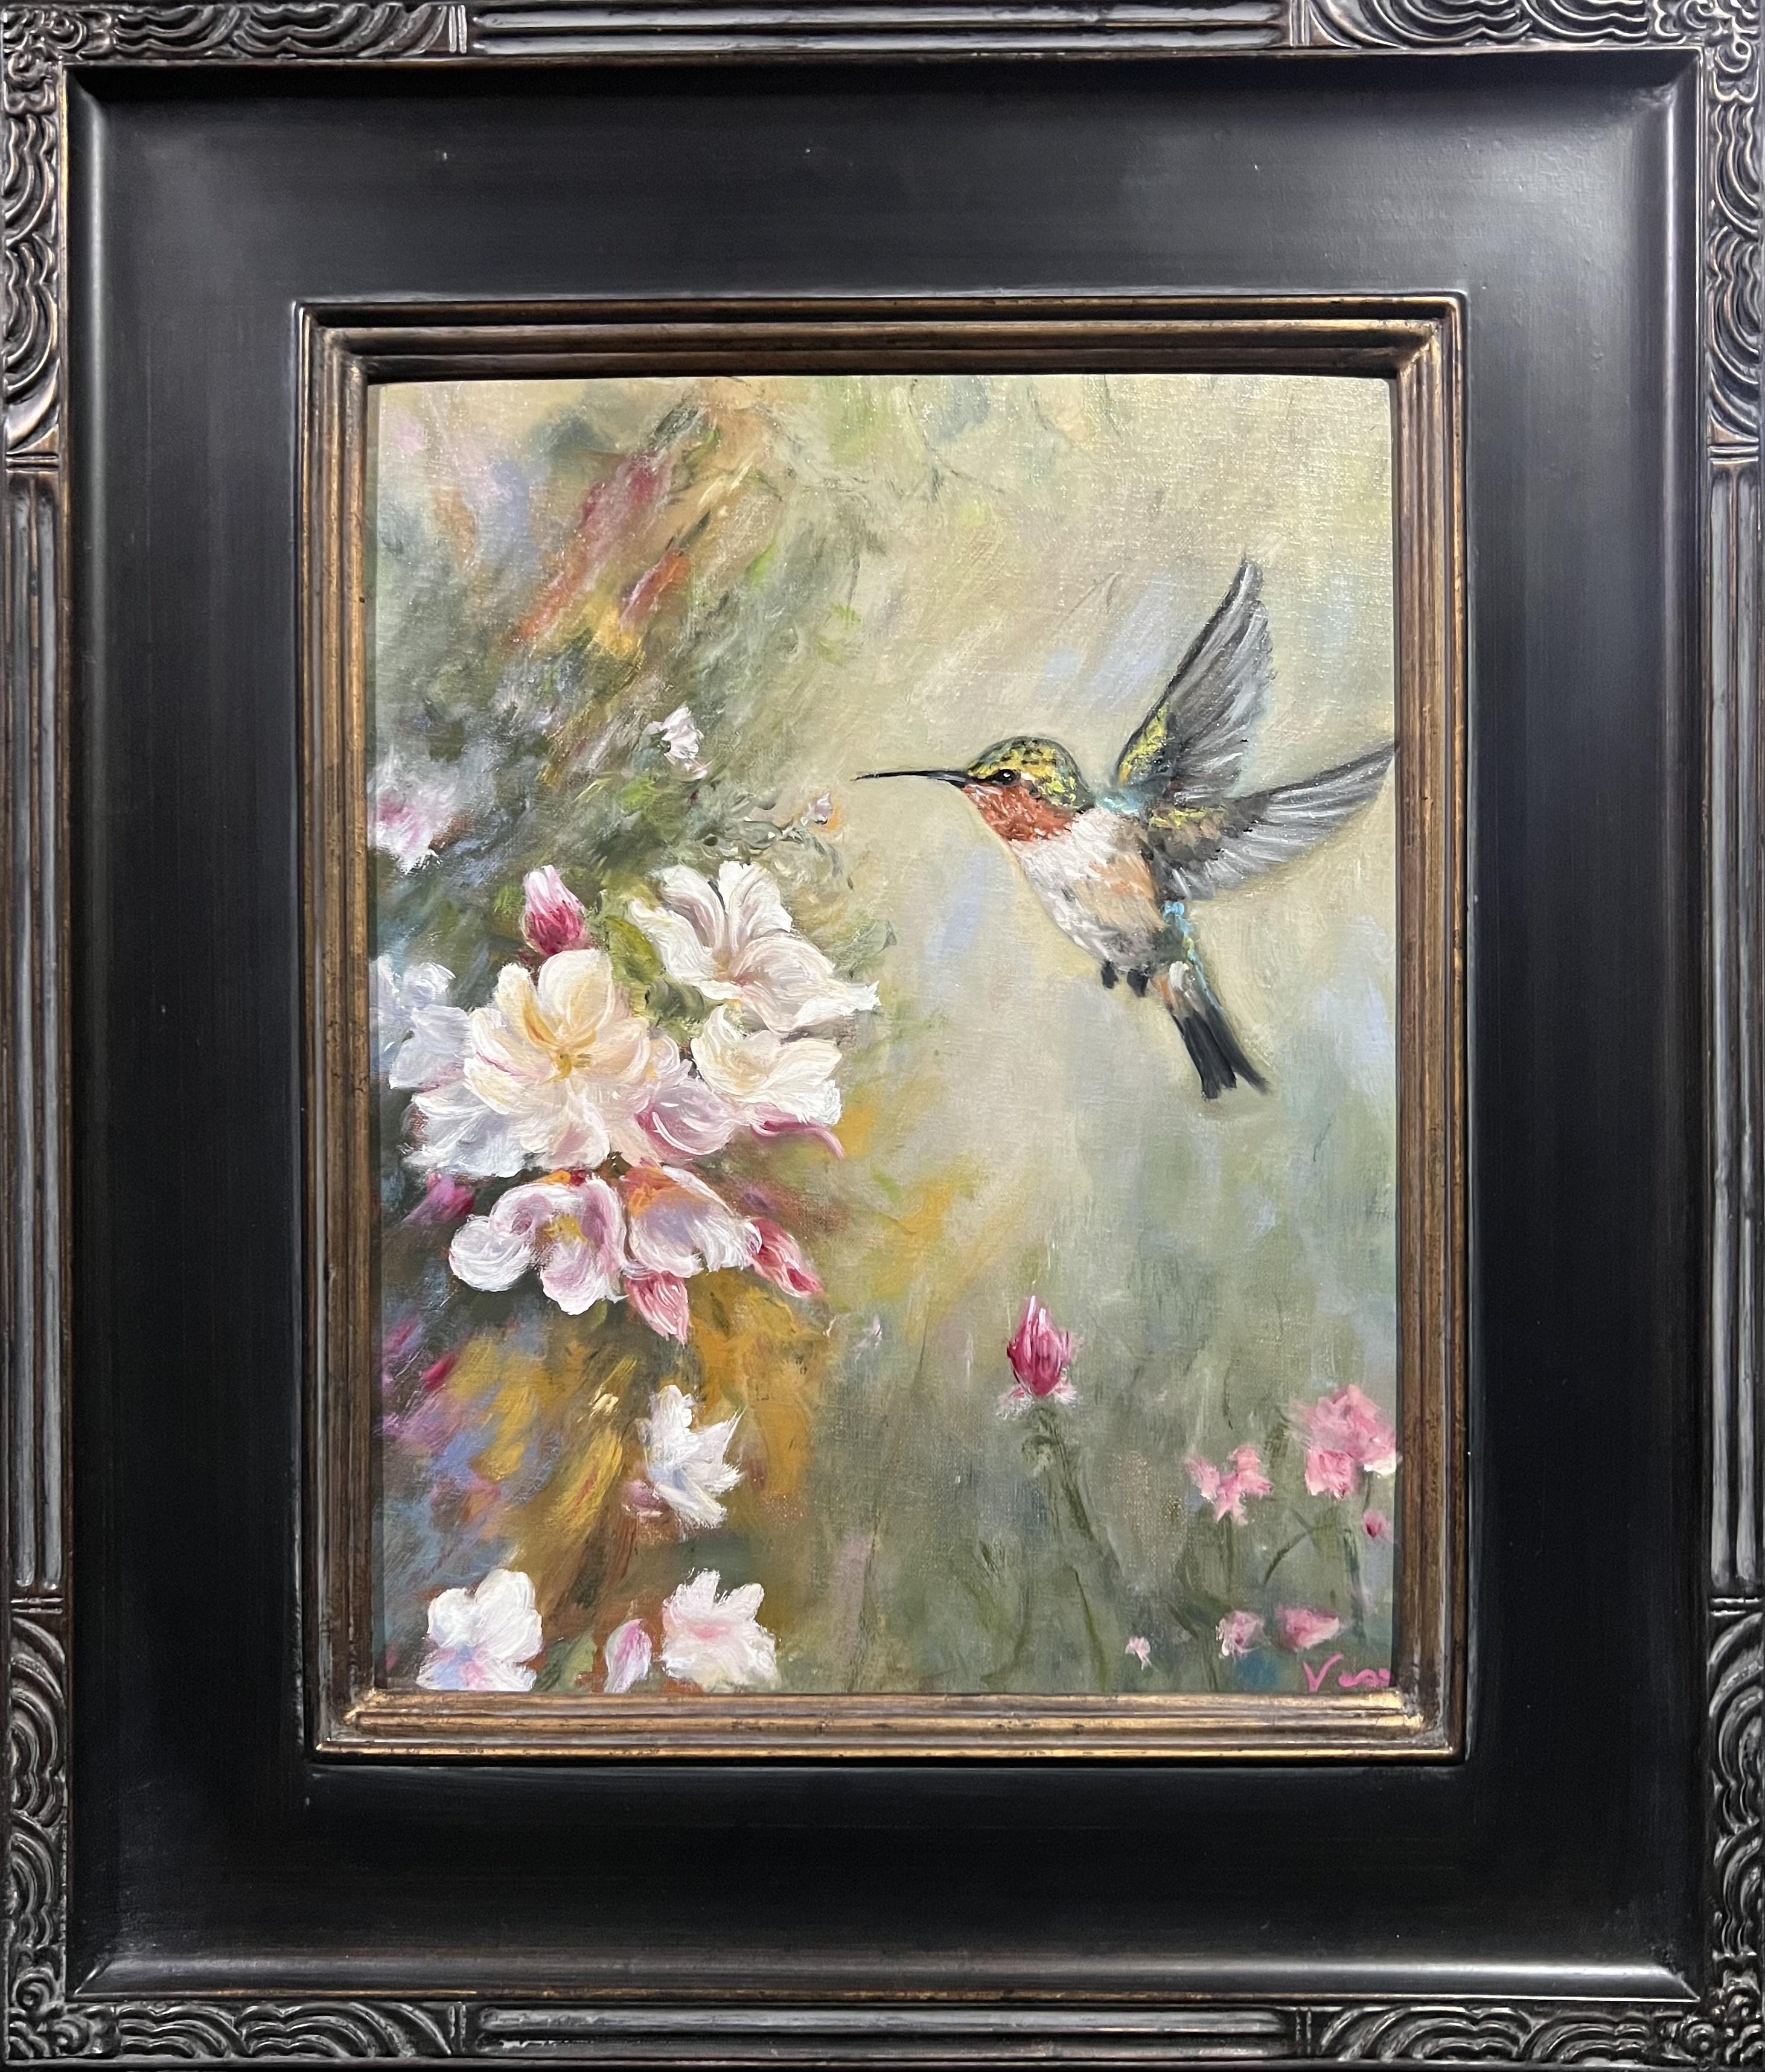 Flying Jewel 14x11 $475 at Hunter Wolff Gallery